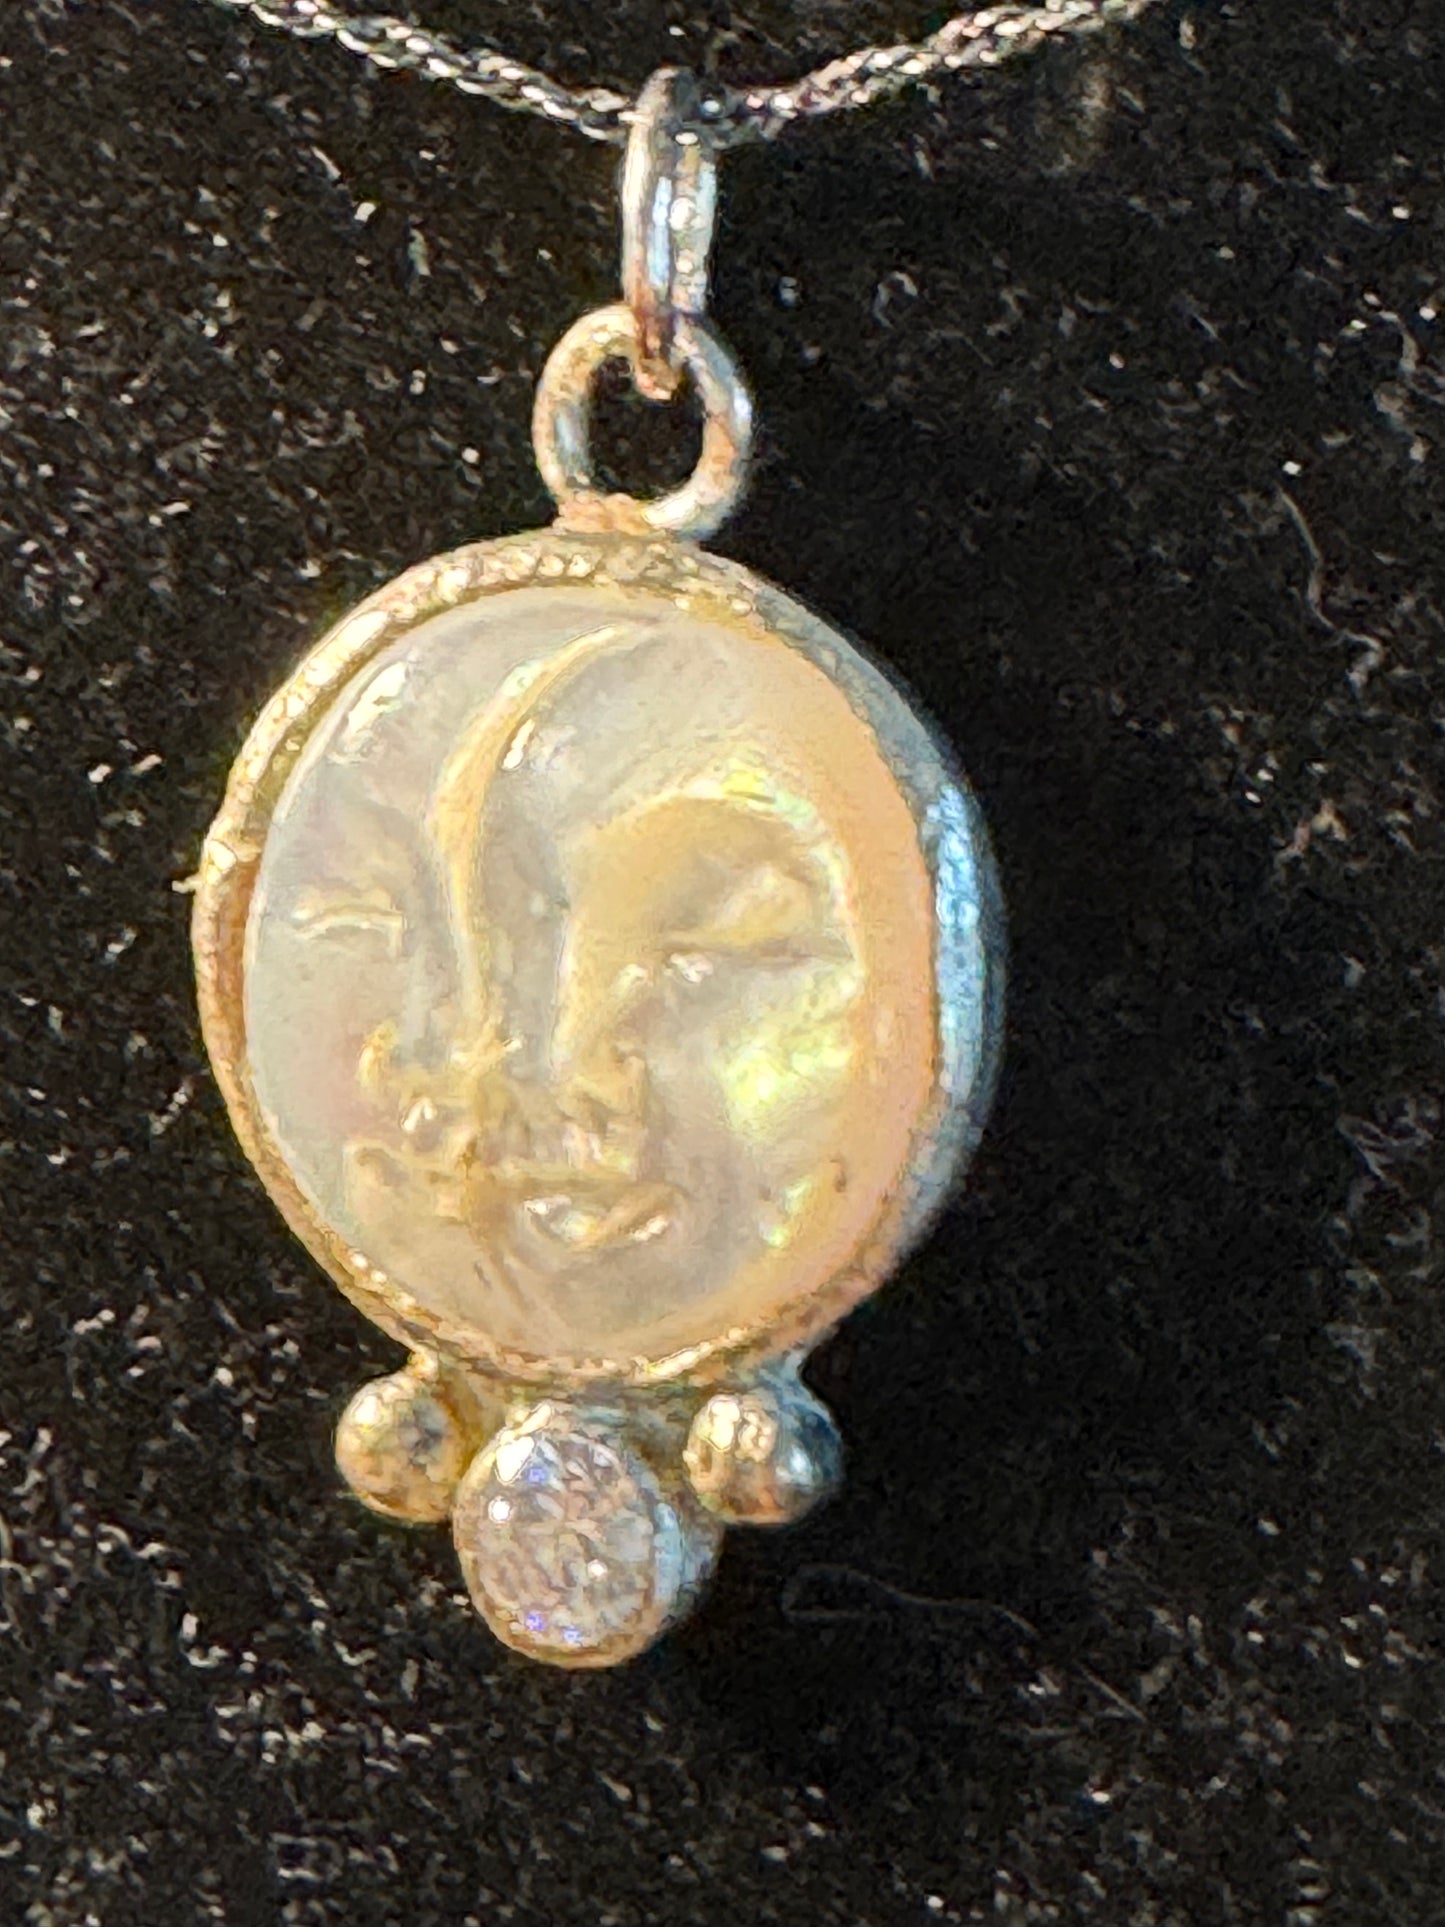 Celestial Mother of Pearl Moon Double-Face Pendant